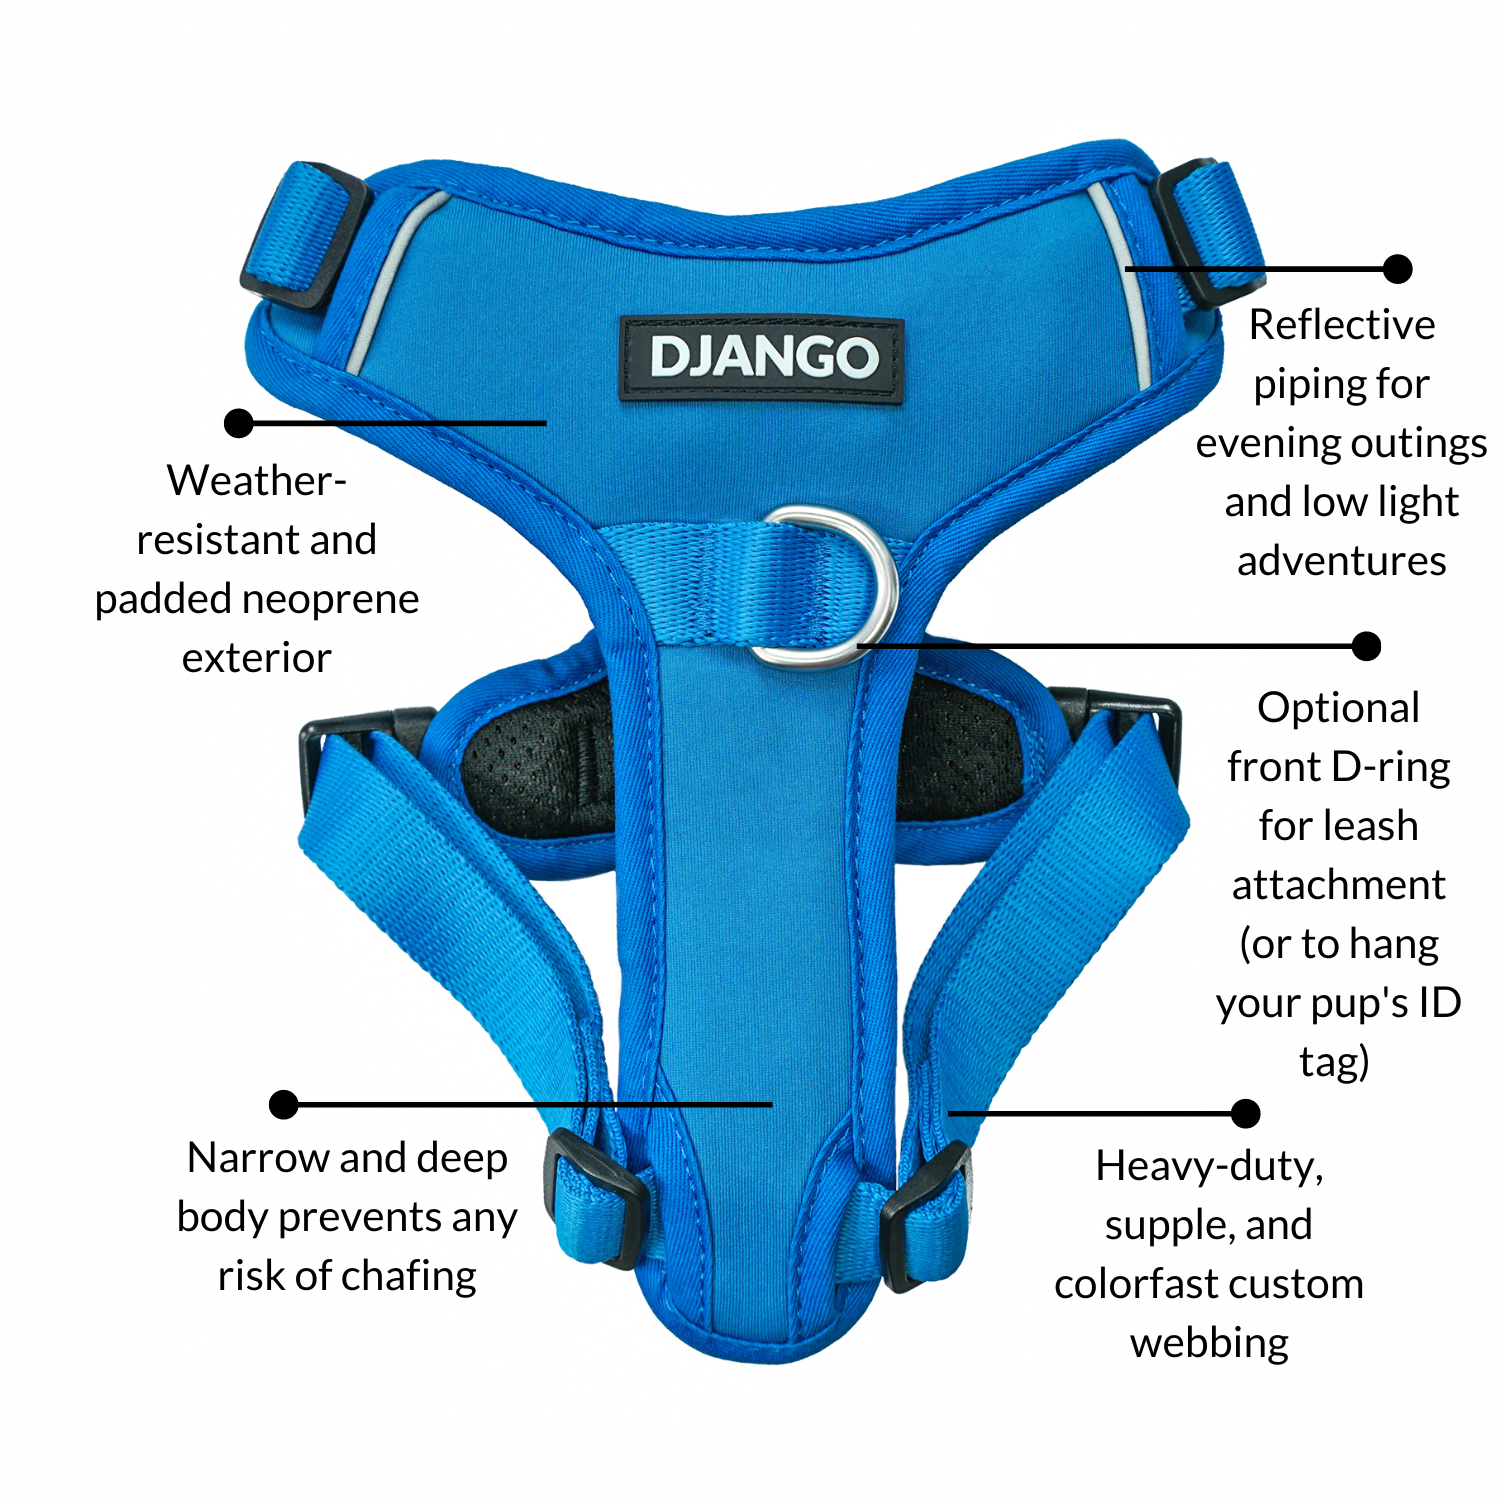 DJANGO Tahoe No Pull Dog Harness in Alpine Blue - Key features include a weather-resistant and padded neoprene exterior, a narrow and deep harness body (to prevent the risk of chafing) reflective piping, and soft webbing. - djangobrand.com